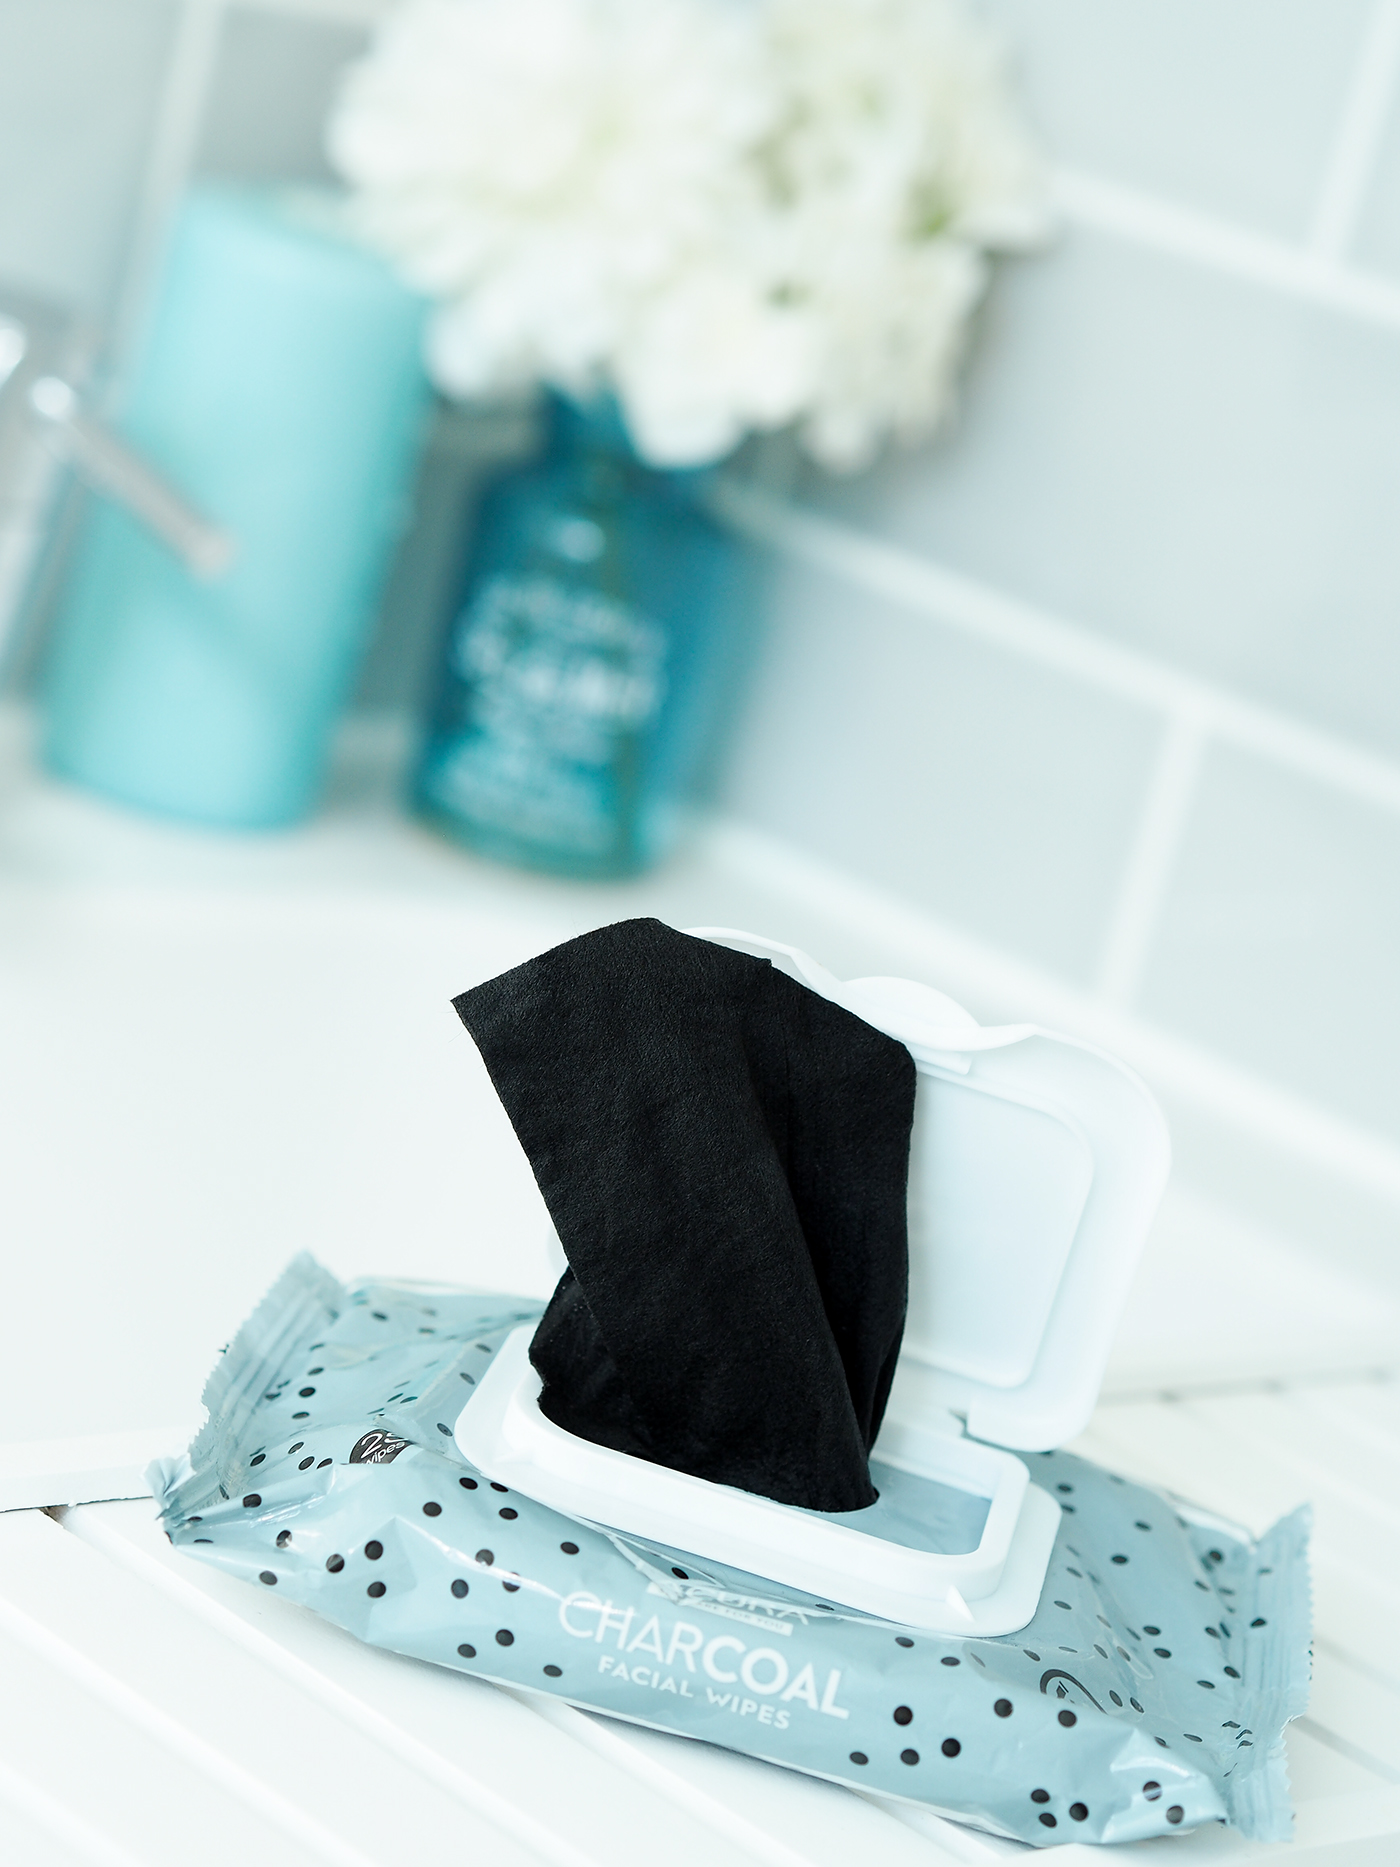 ALDI Lacura charcoal face wipes review 